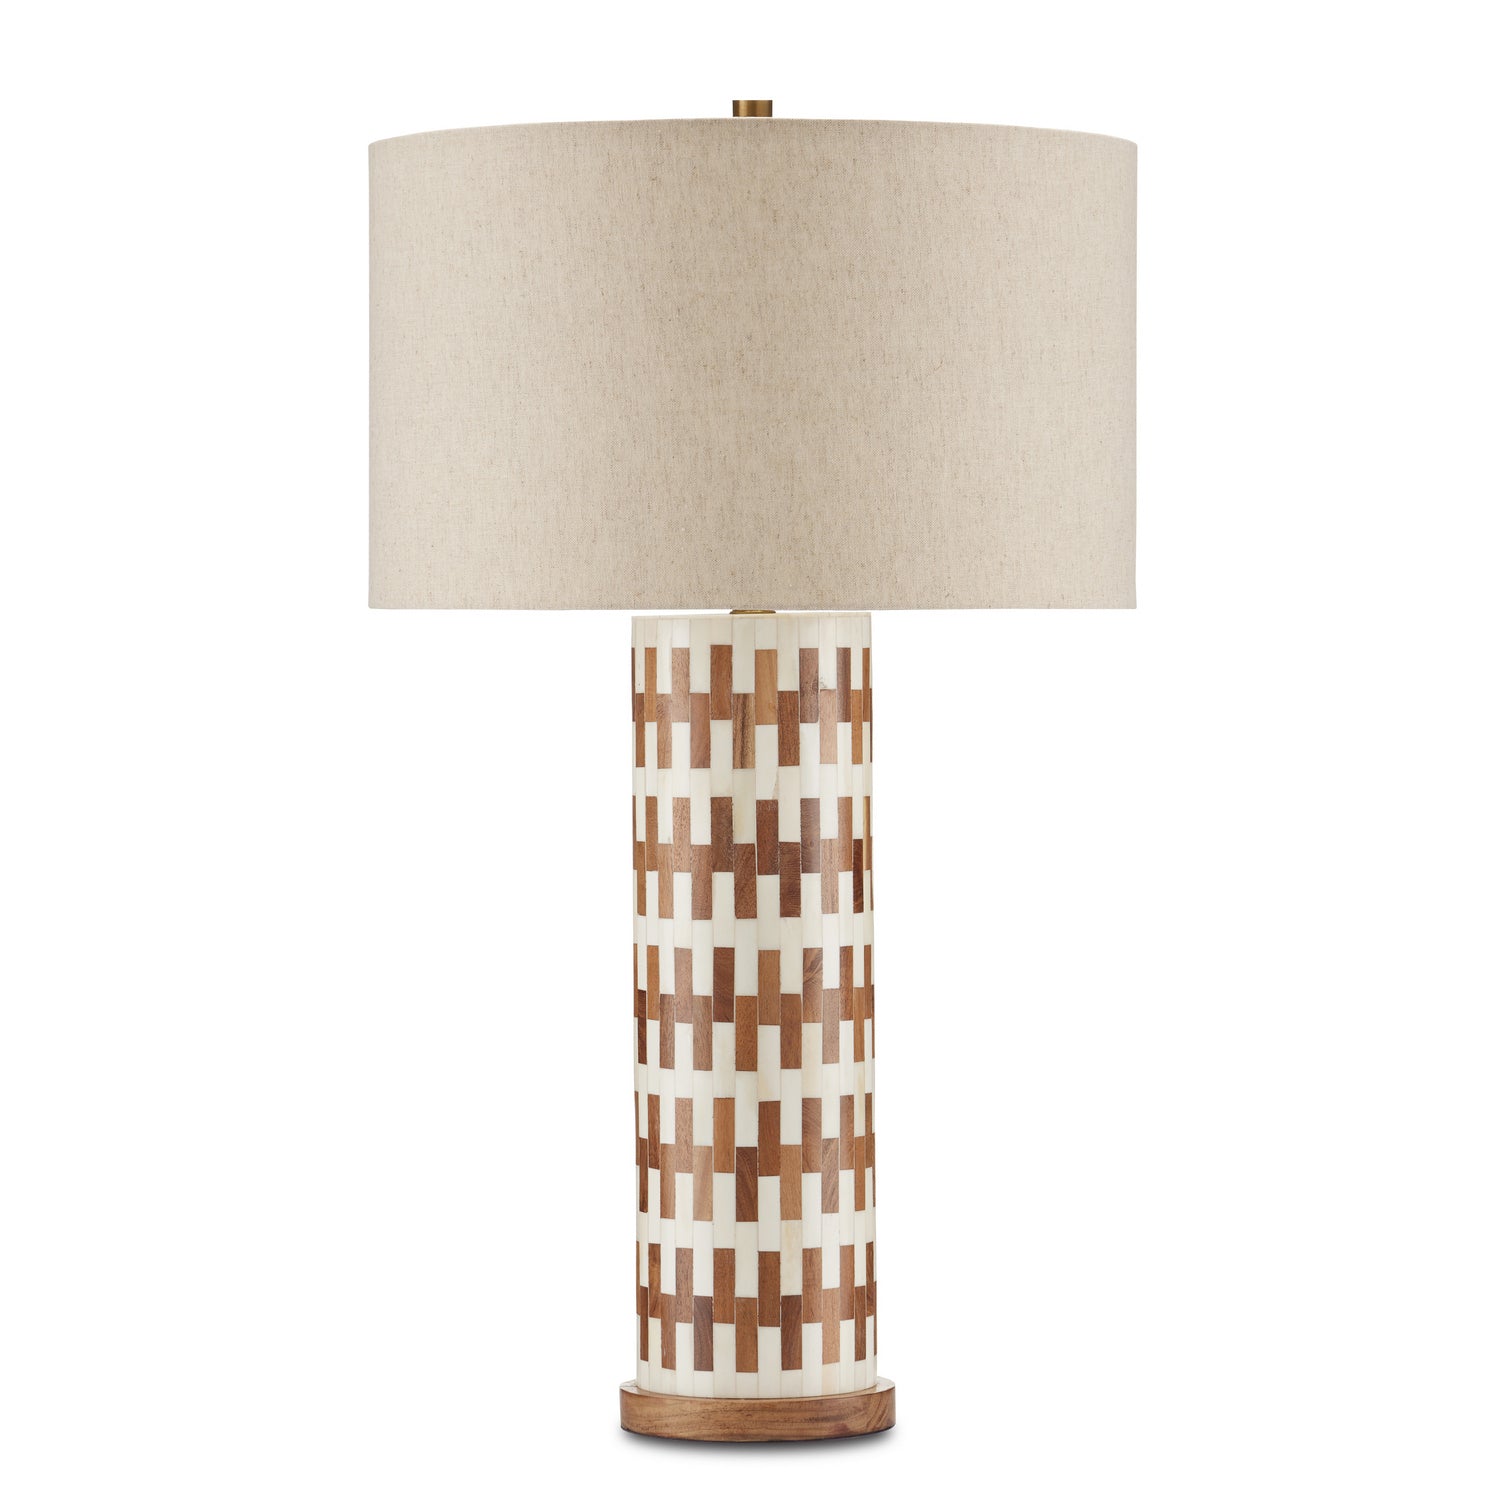 One Light Table Lamp from the Tia collection in White/Natural/Antique Brass finish